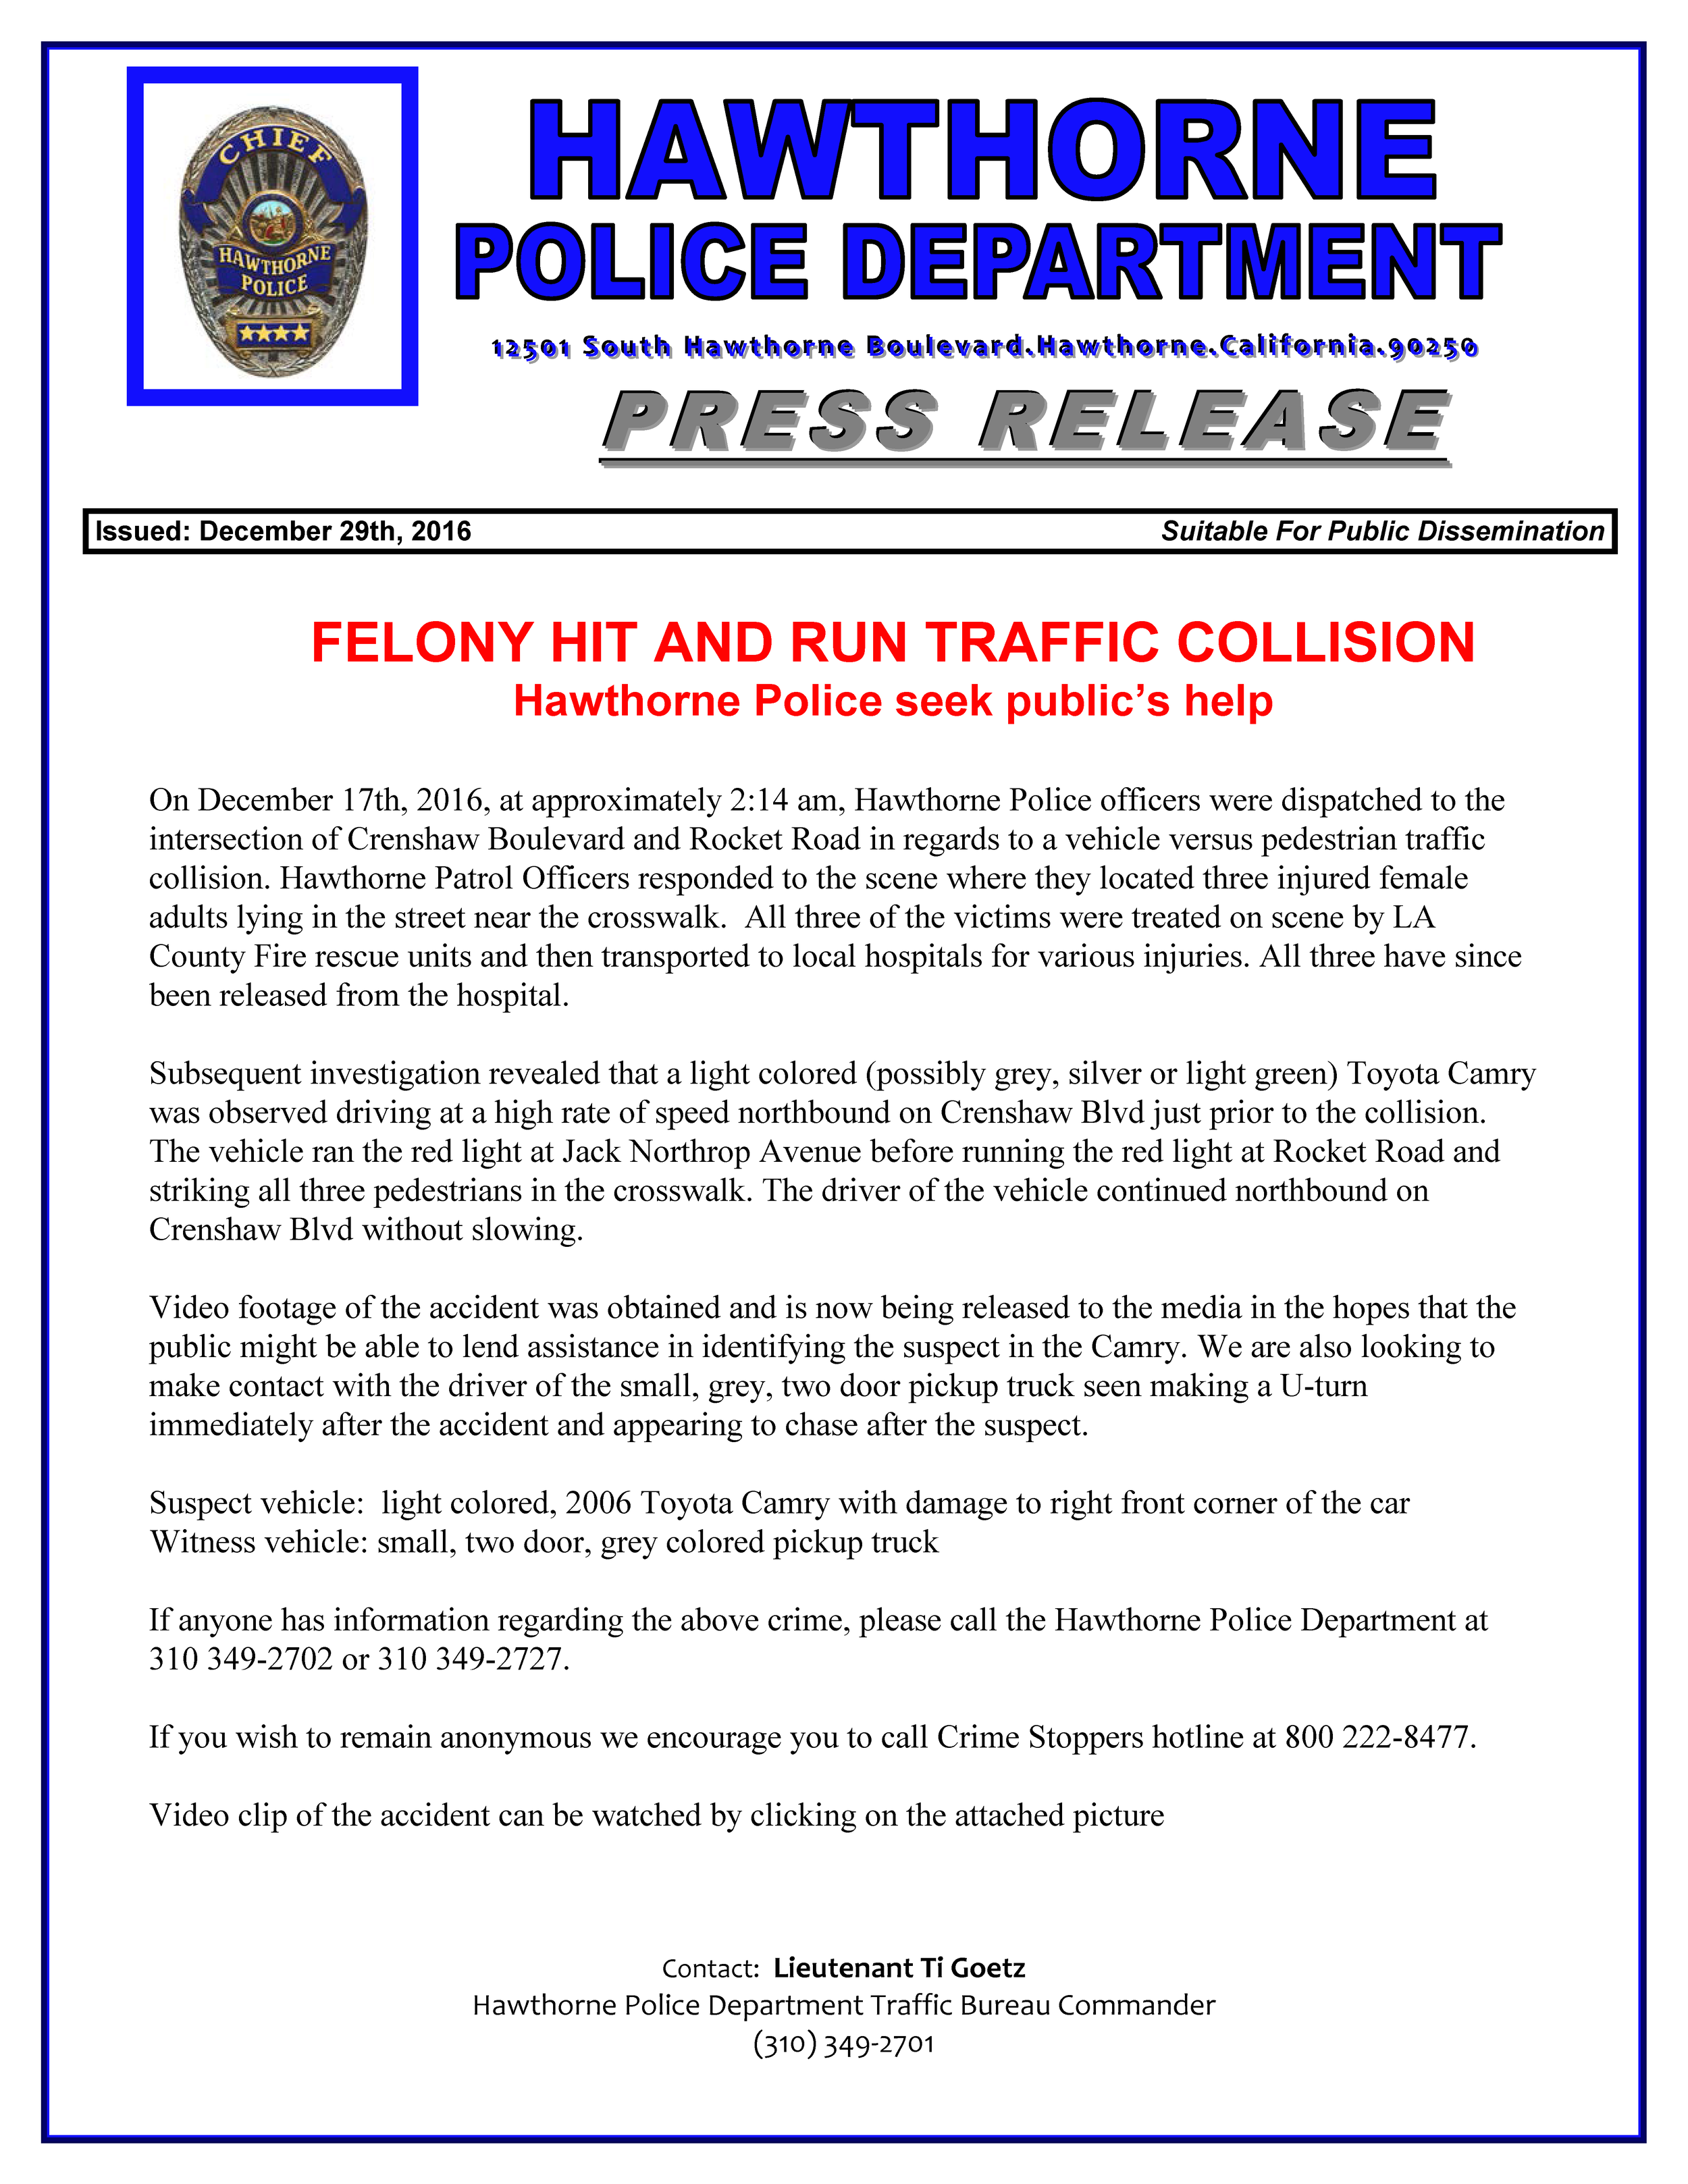 hit and run crosswalk press release_Page_1.png